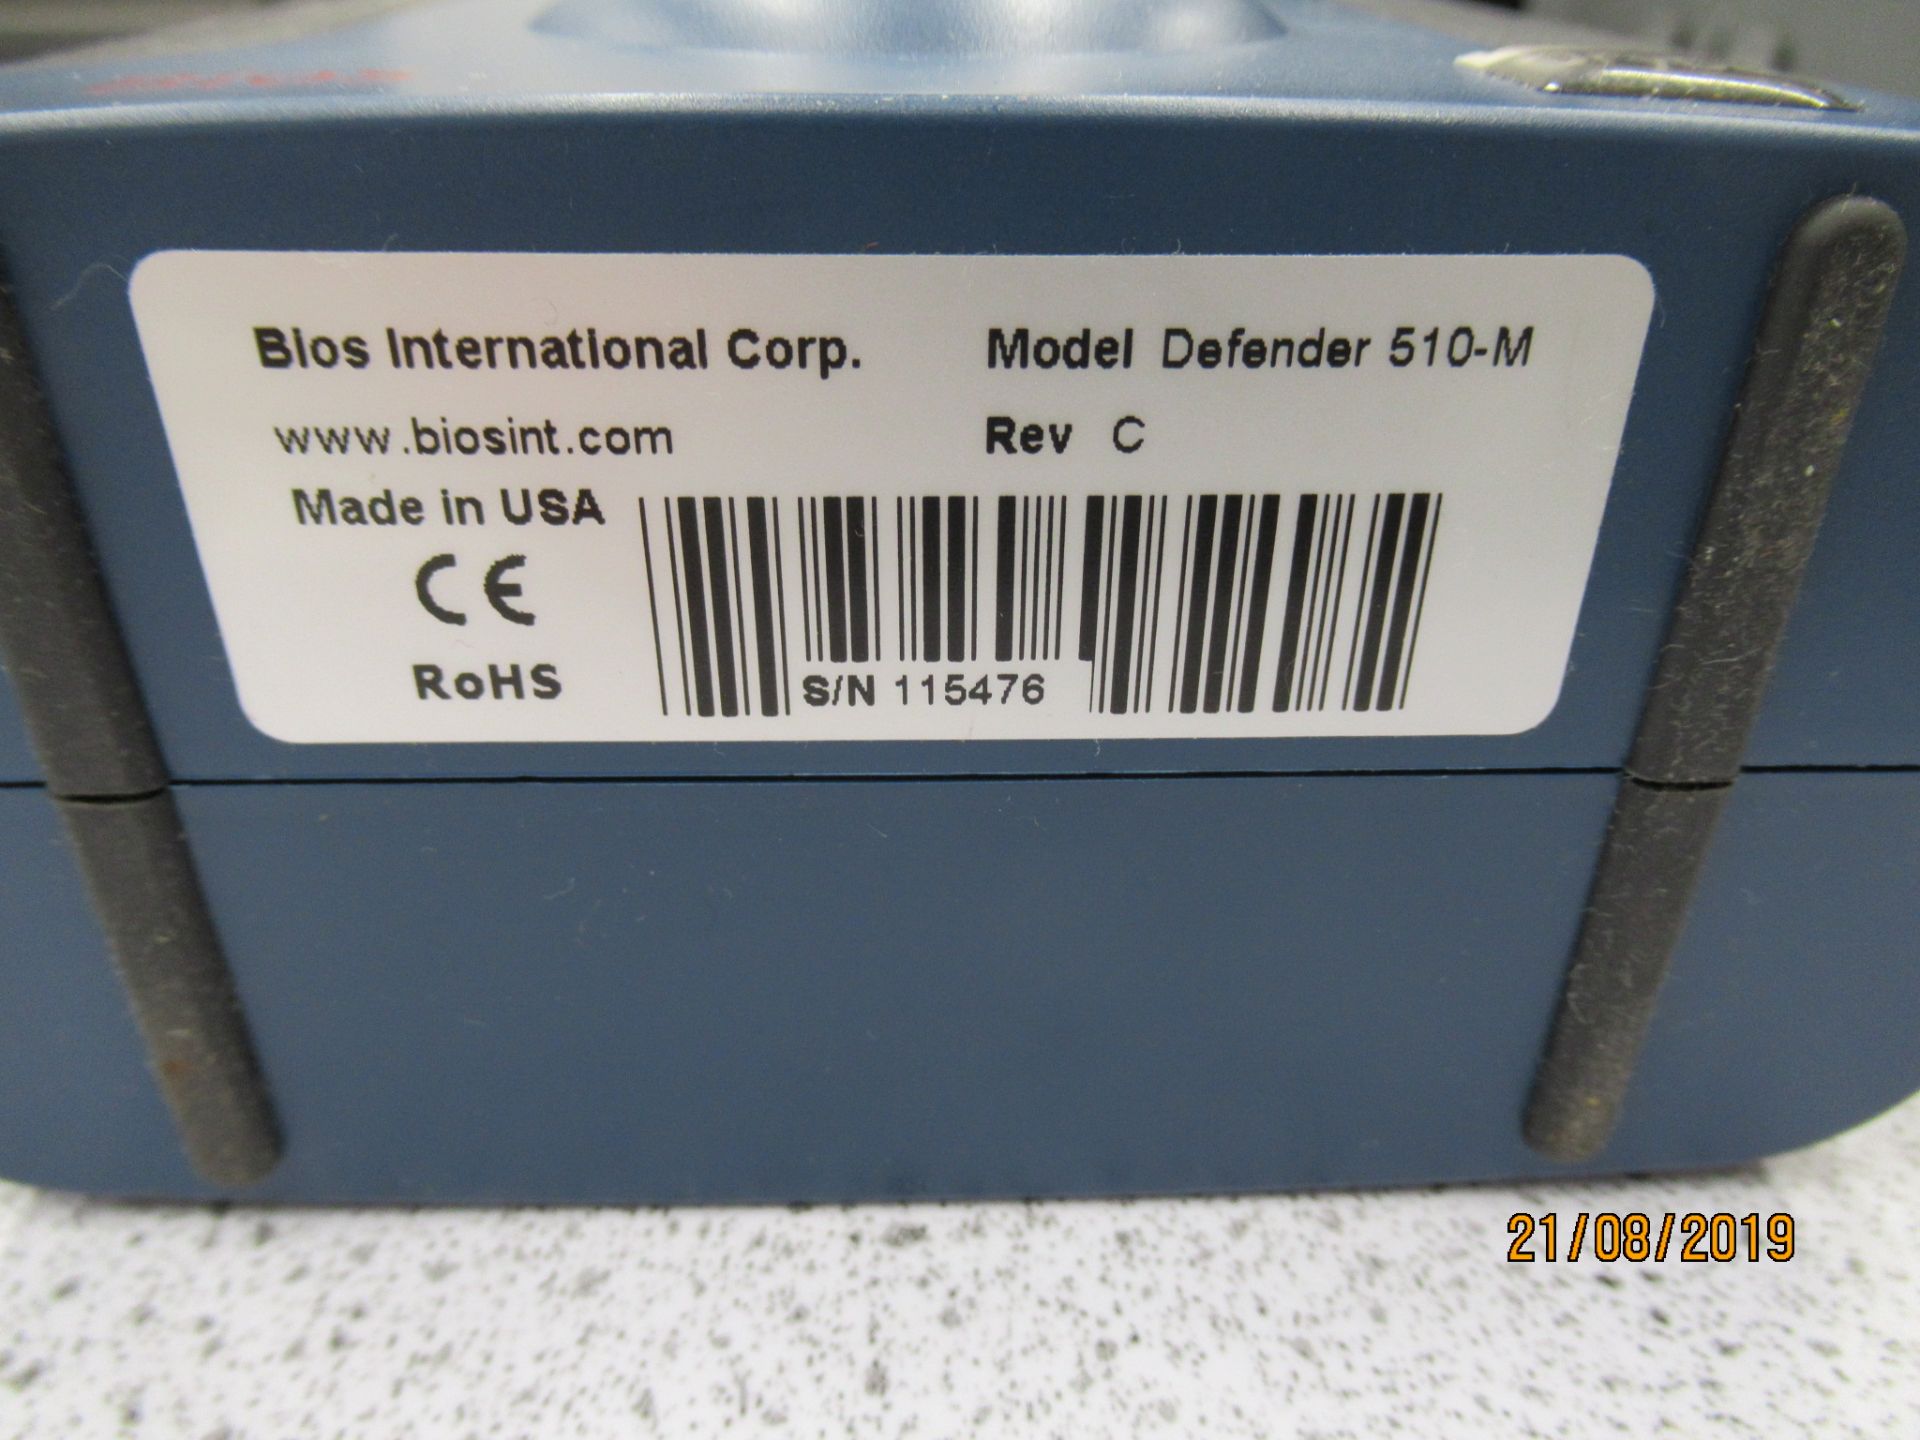 BIOS Defender, 510-M primary gas flow calibrator Size 150 x 180 x 170mm Serial No. 115476 - Image 3 of 3